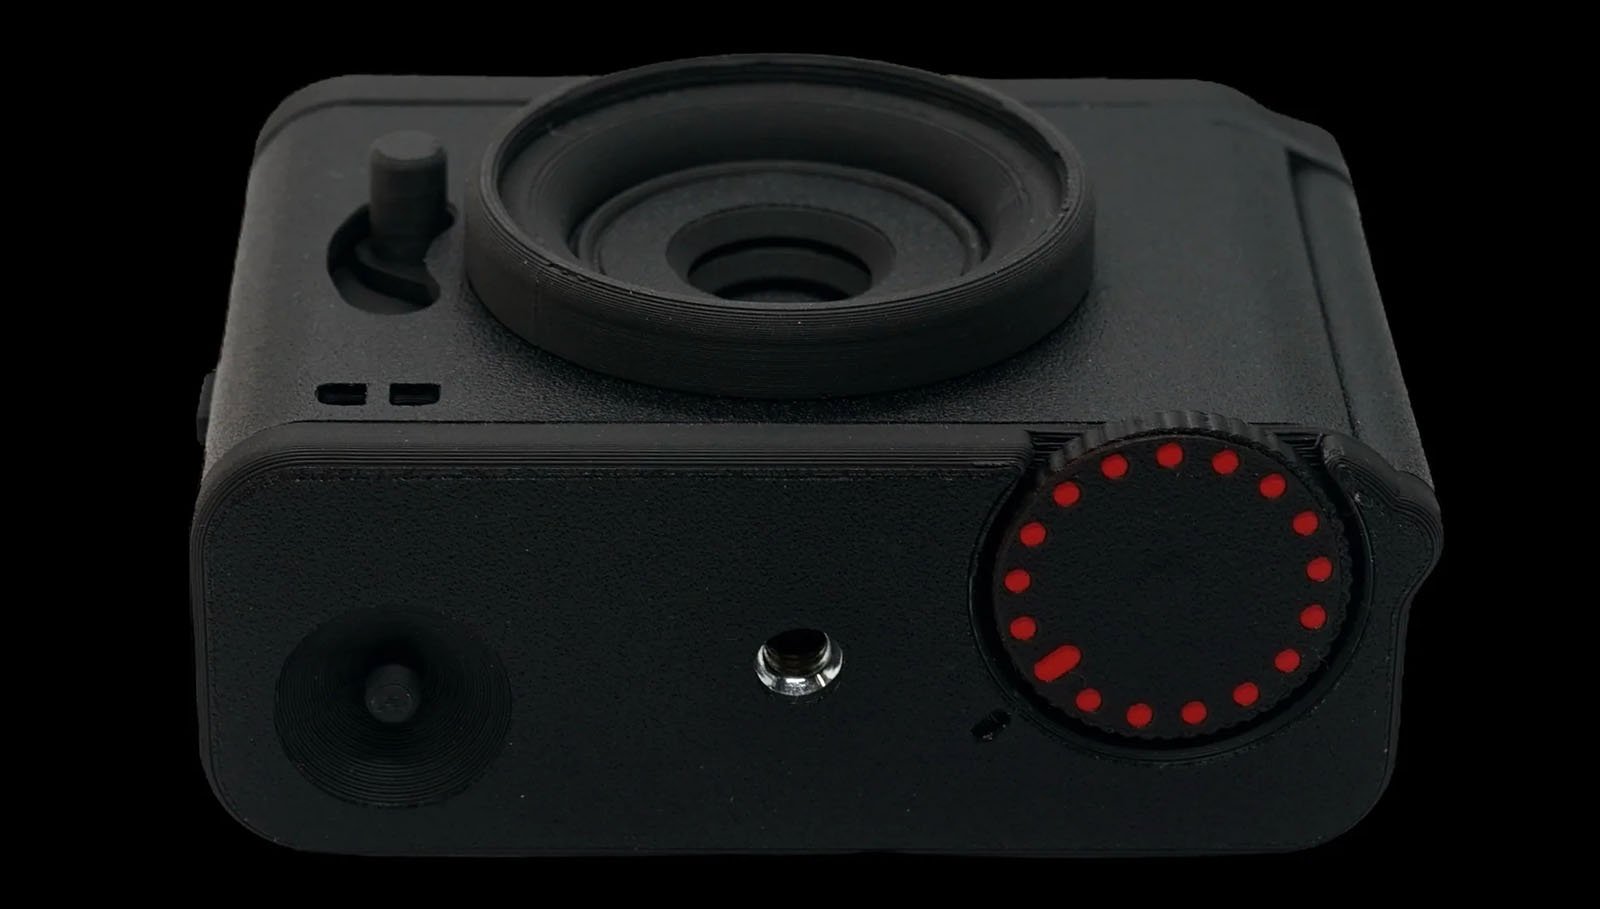 A close-up of a black, compact camera with a large lens in the middle. There's a circular control dial with red markers on the right side and a small protruding button towards the top left. The camera has a minimalist design against a black background.